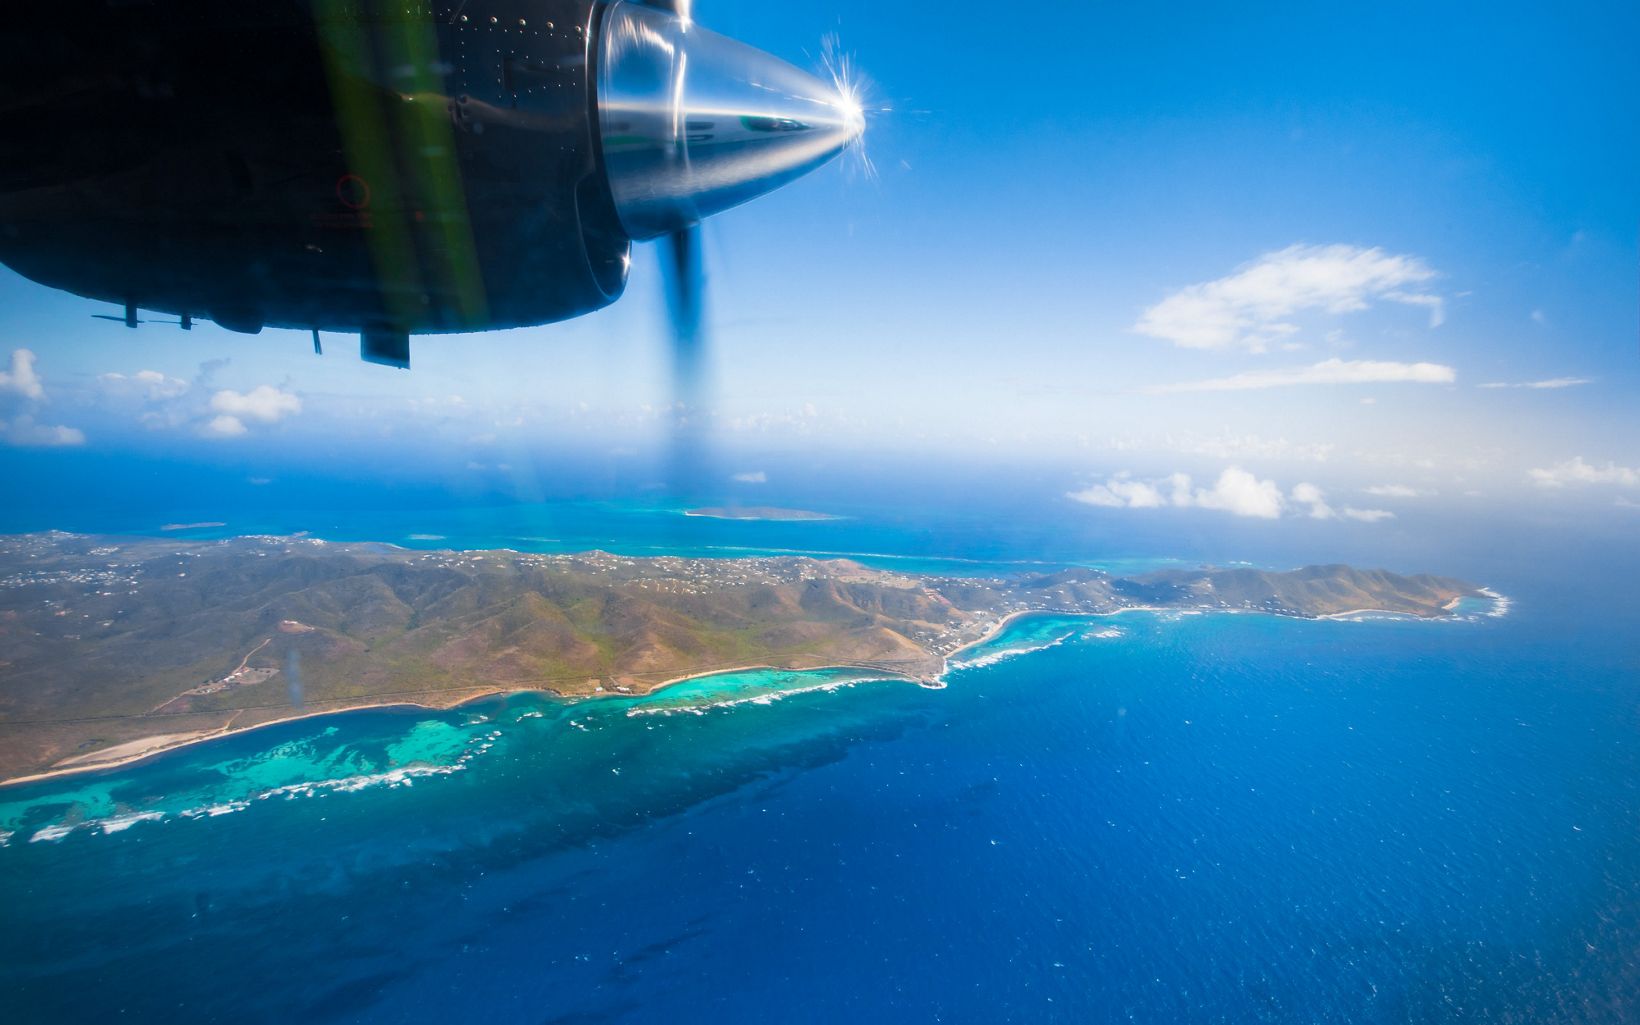 The mission in St. Croix was to map the East End Marine Park, a protected area pictured here.